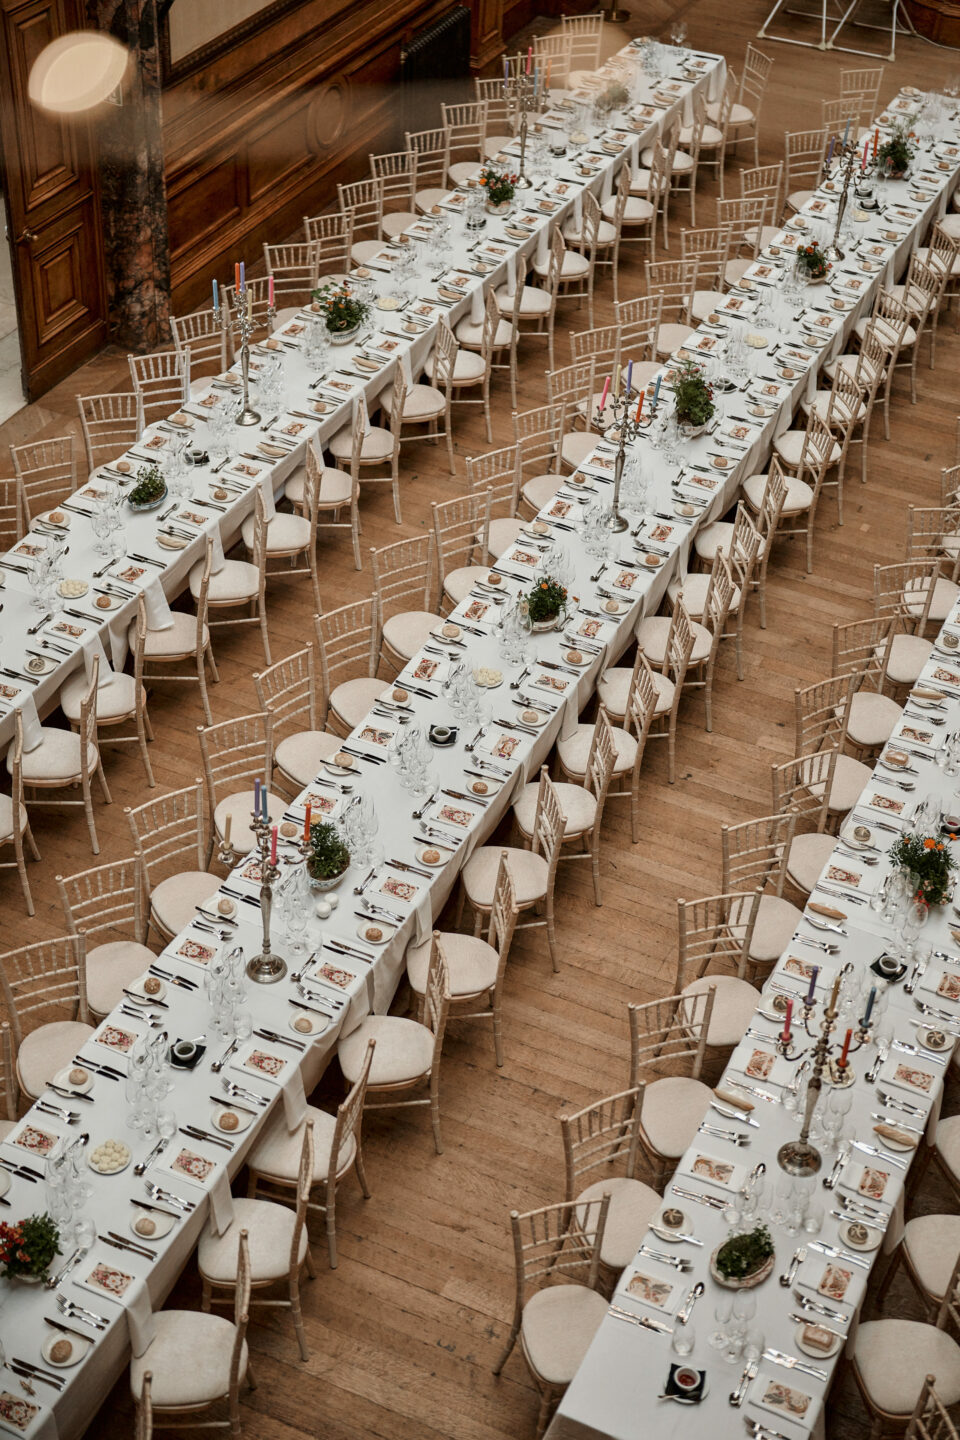 A big room filled with tables and chairs.